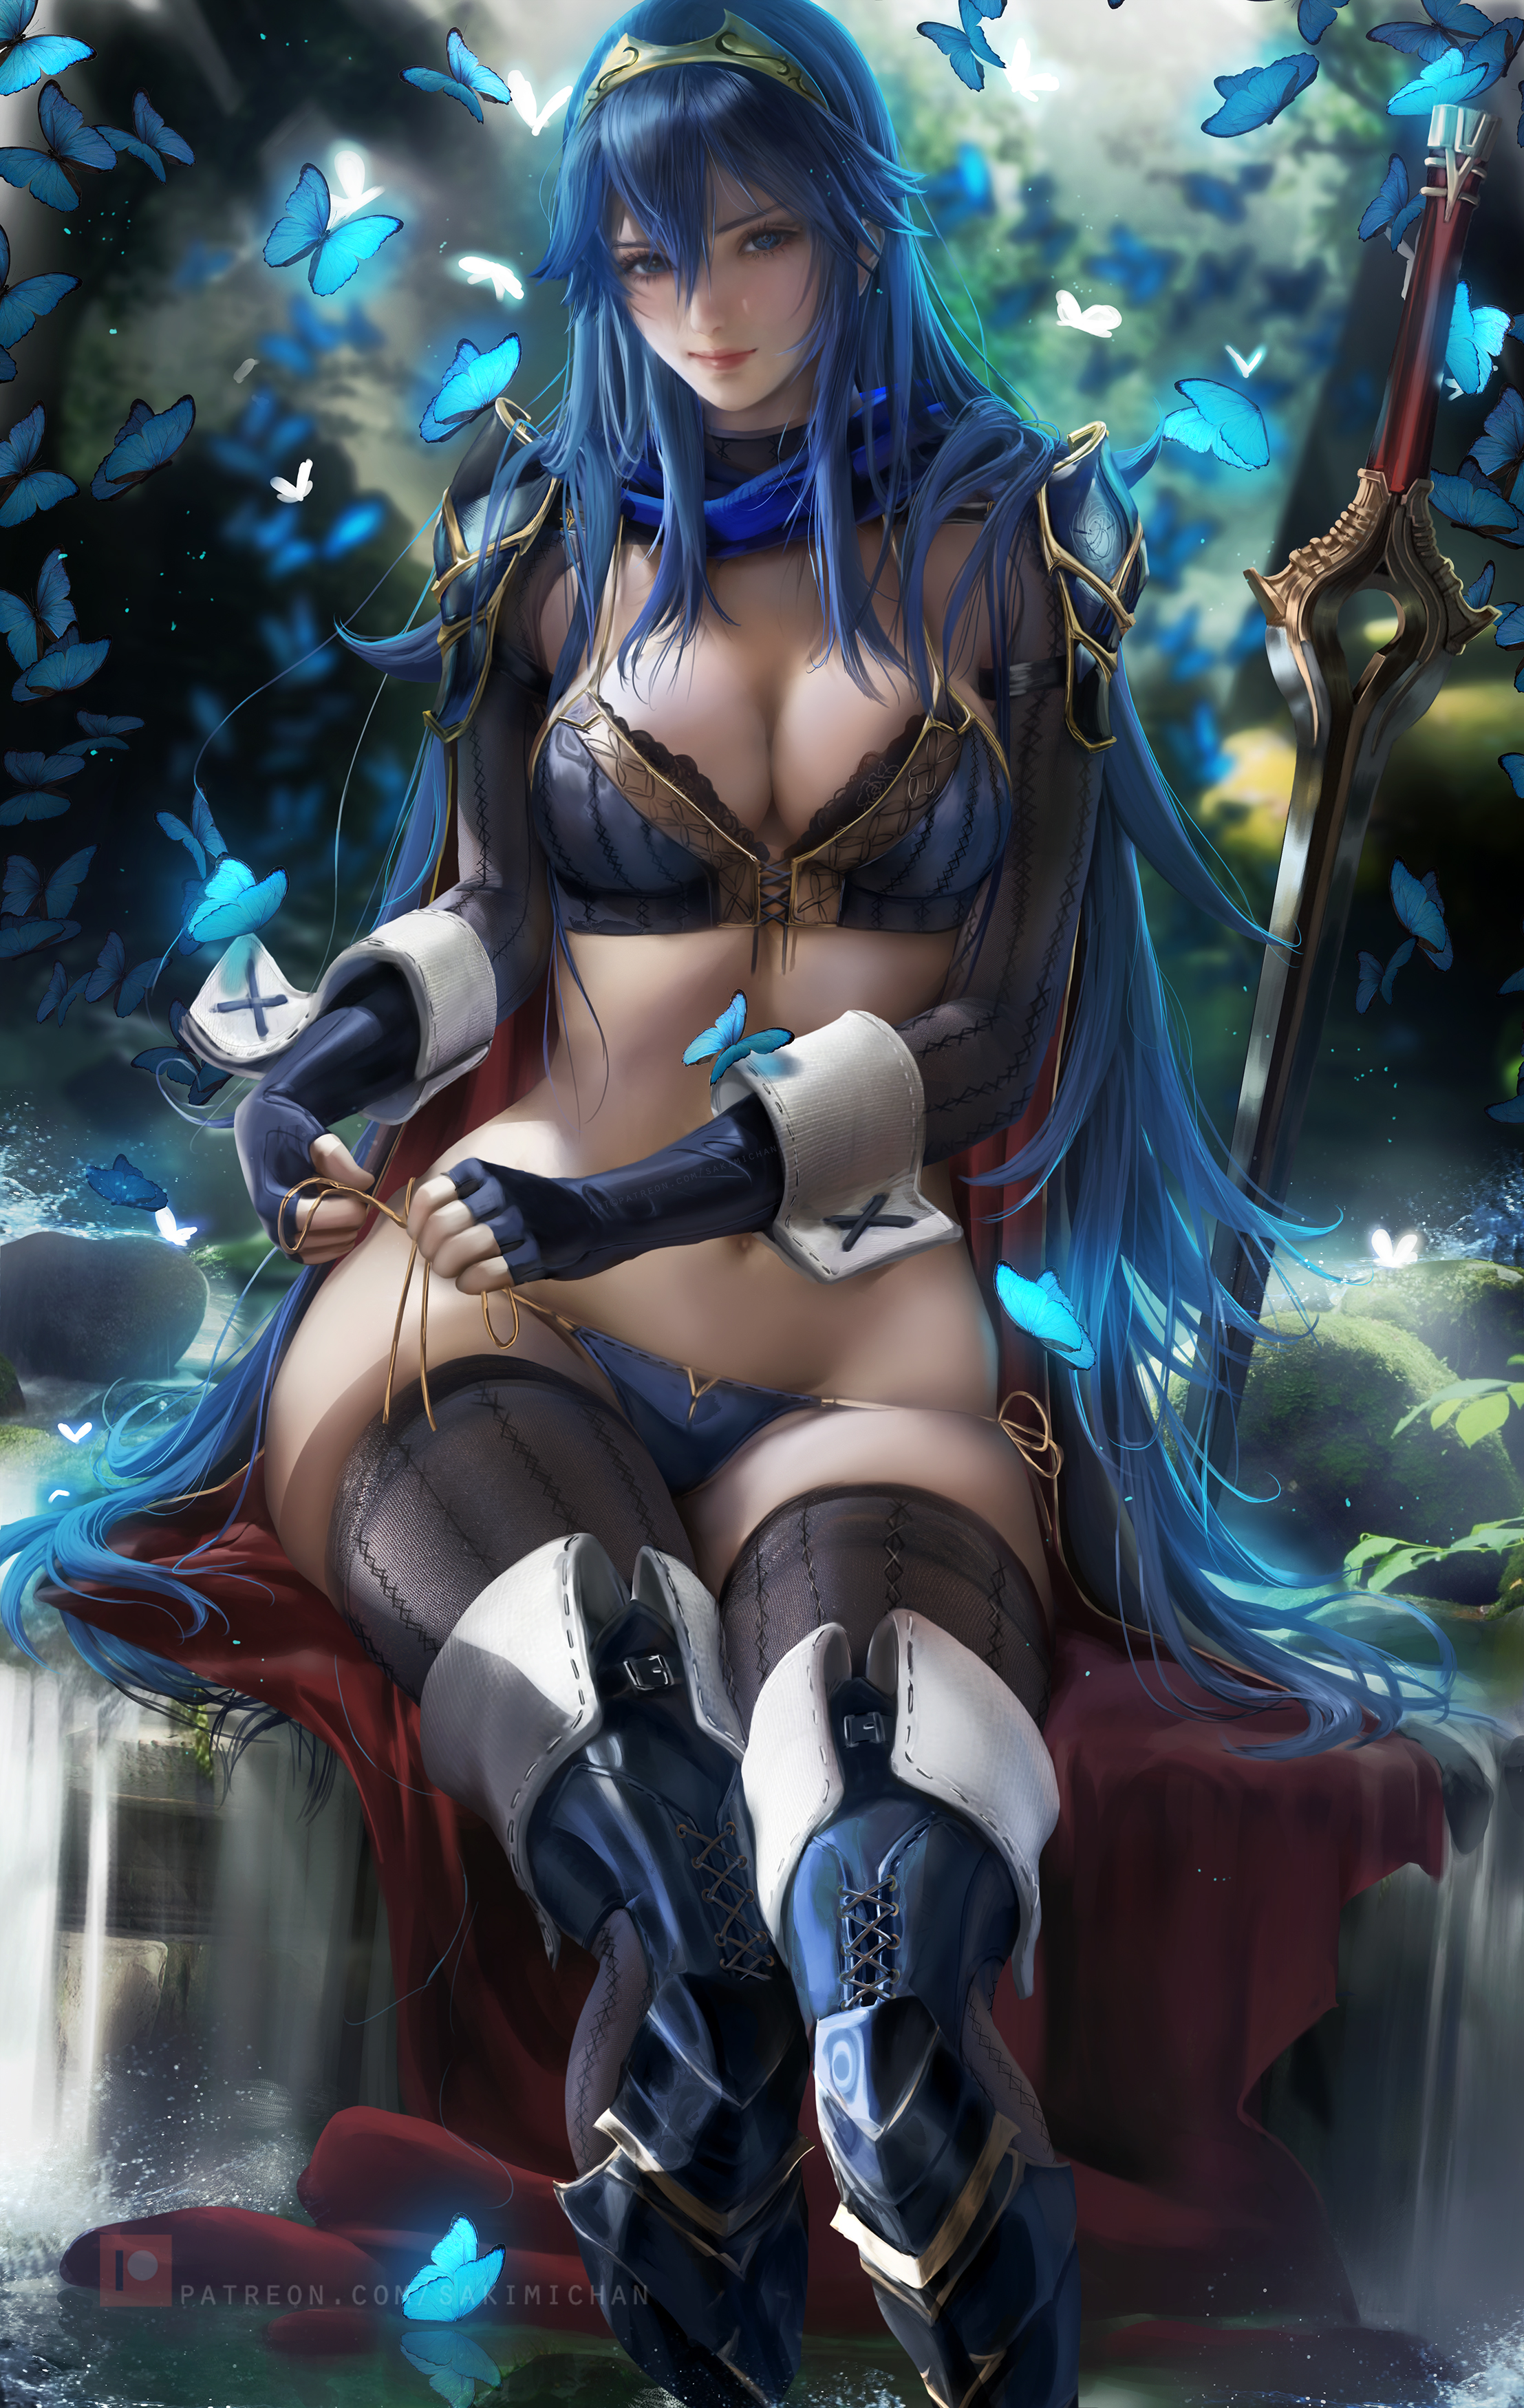 General 2215x3500 women long hair looking at viewer lingerie bra belly panties stockings black stockings sitting fantasy art fantasy girl thigh high boots artwork digital art drawing illustration anime Lucina Fire Emblem Fire Emblem Awakening video games video game characters video game girls sword weapon armor arm warmers thigh-highs underwear butterfly smiling portrait display depth of field waterfall Sakimichan cape